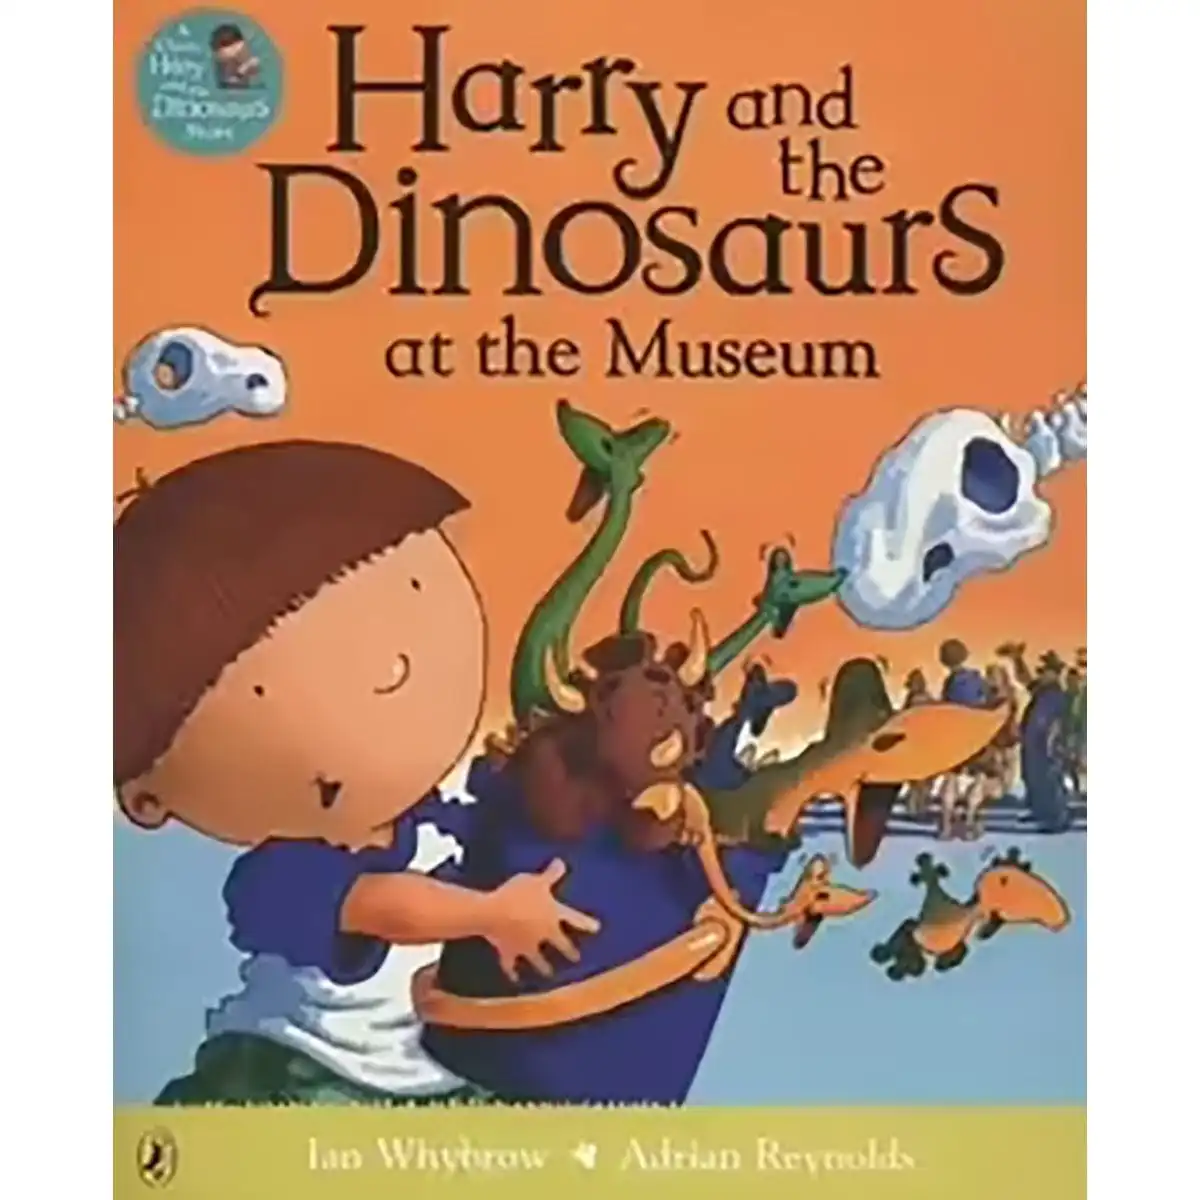 Harry & the Dinosaurs at the Museum